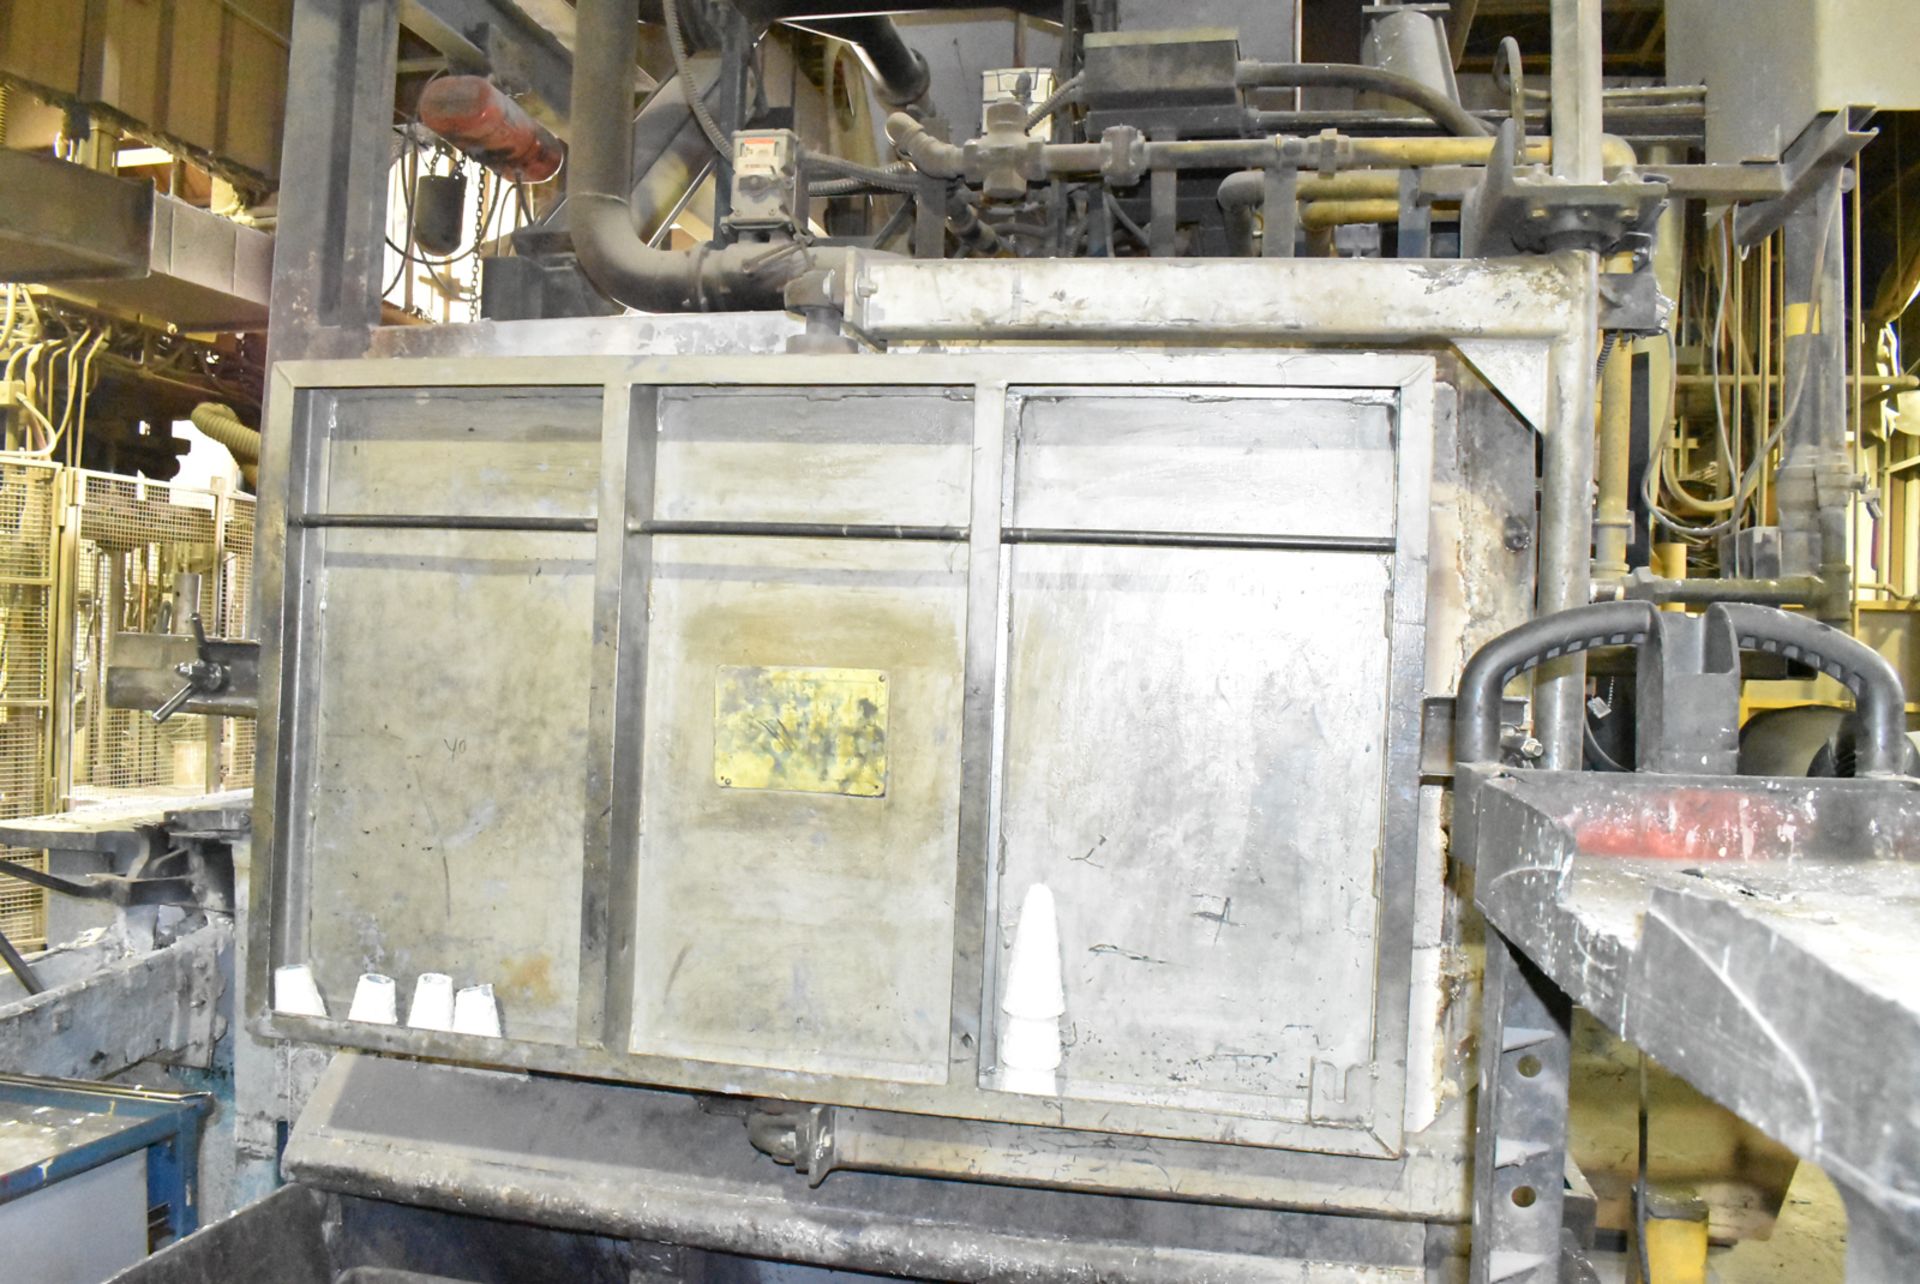 GASMAC TMDH 1800 NATURAL GAS FIRED ALUMINUM MELTING & HOLDING FURNACE WITH ALLEN BRADLEY PANELVIEW - Image 6 of 12